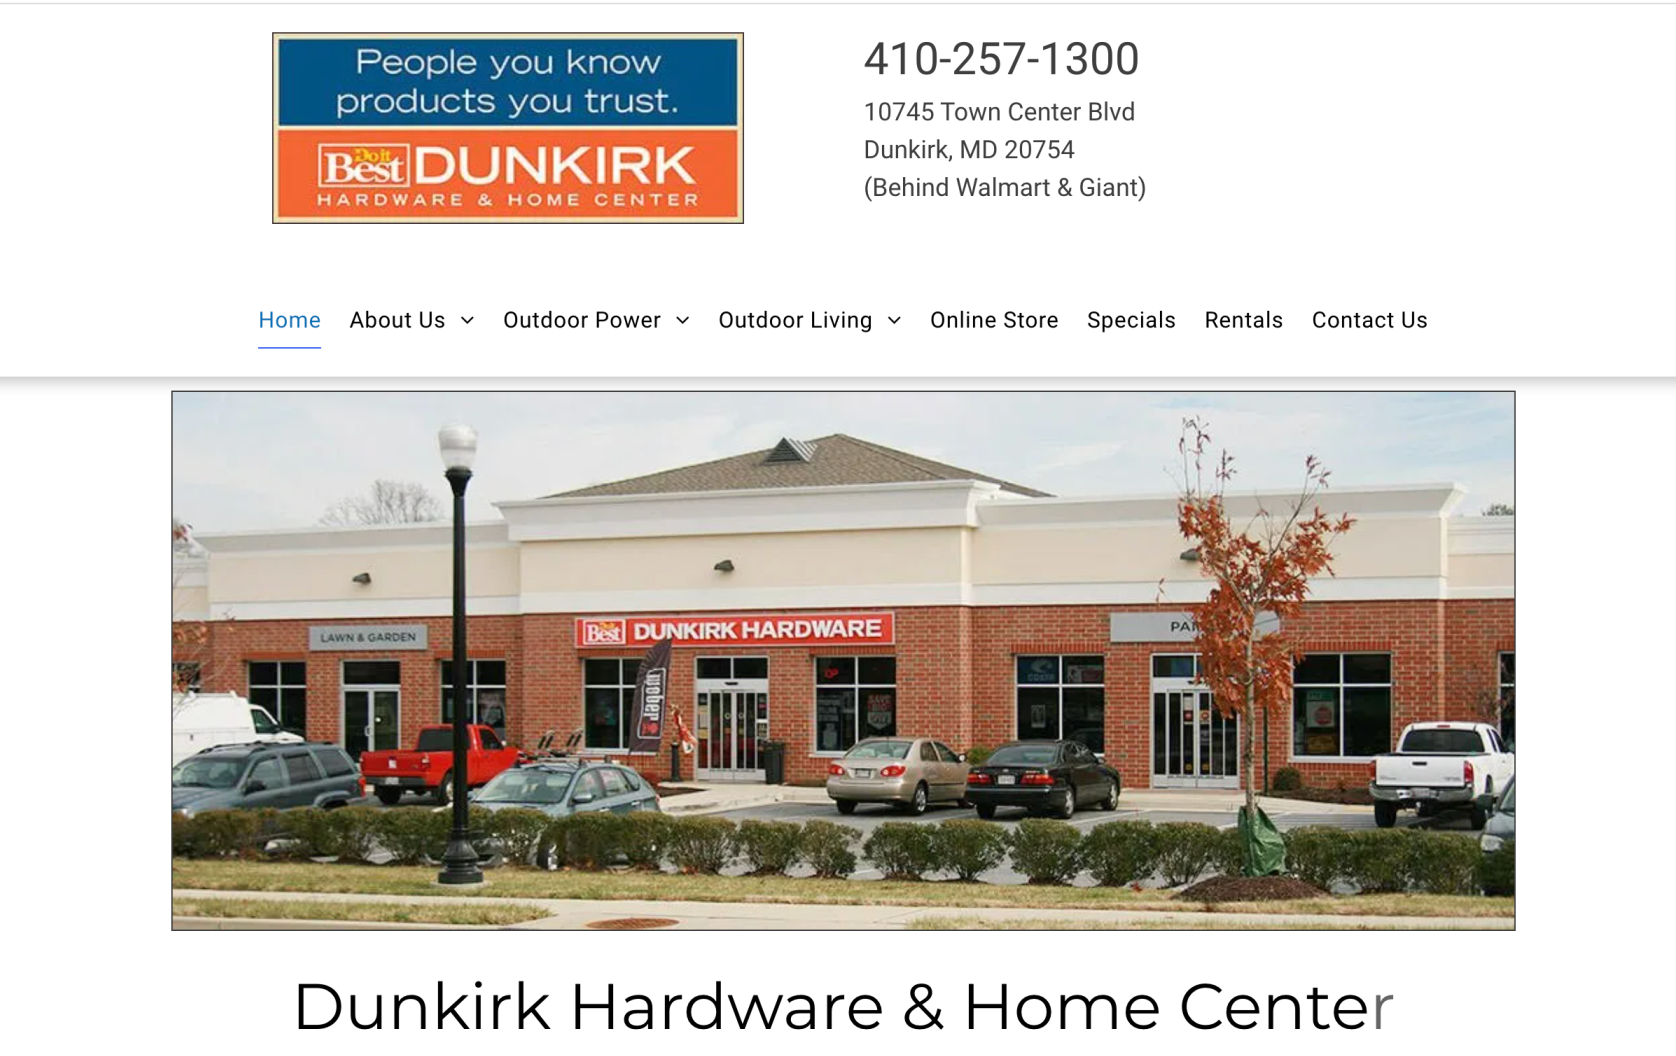 A website for dunkirk hardware and home center